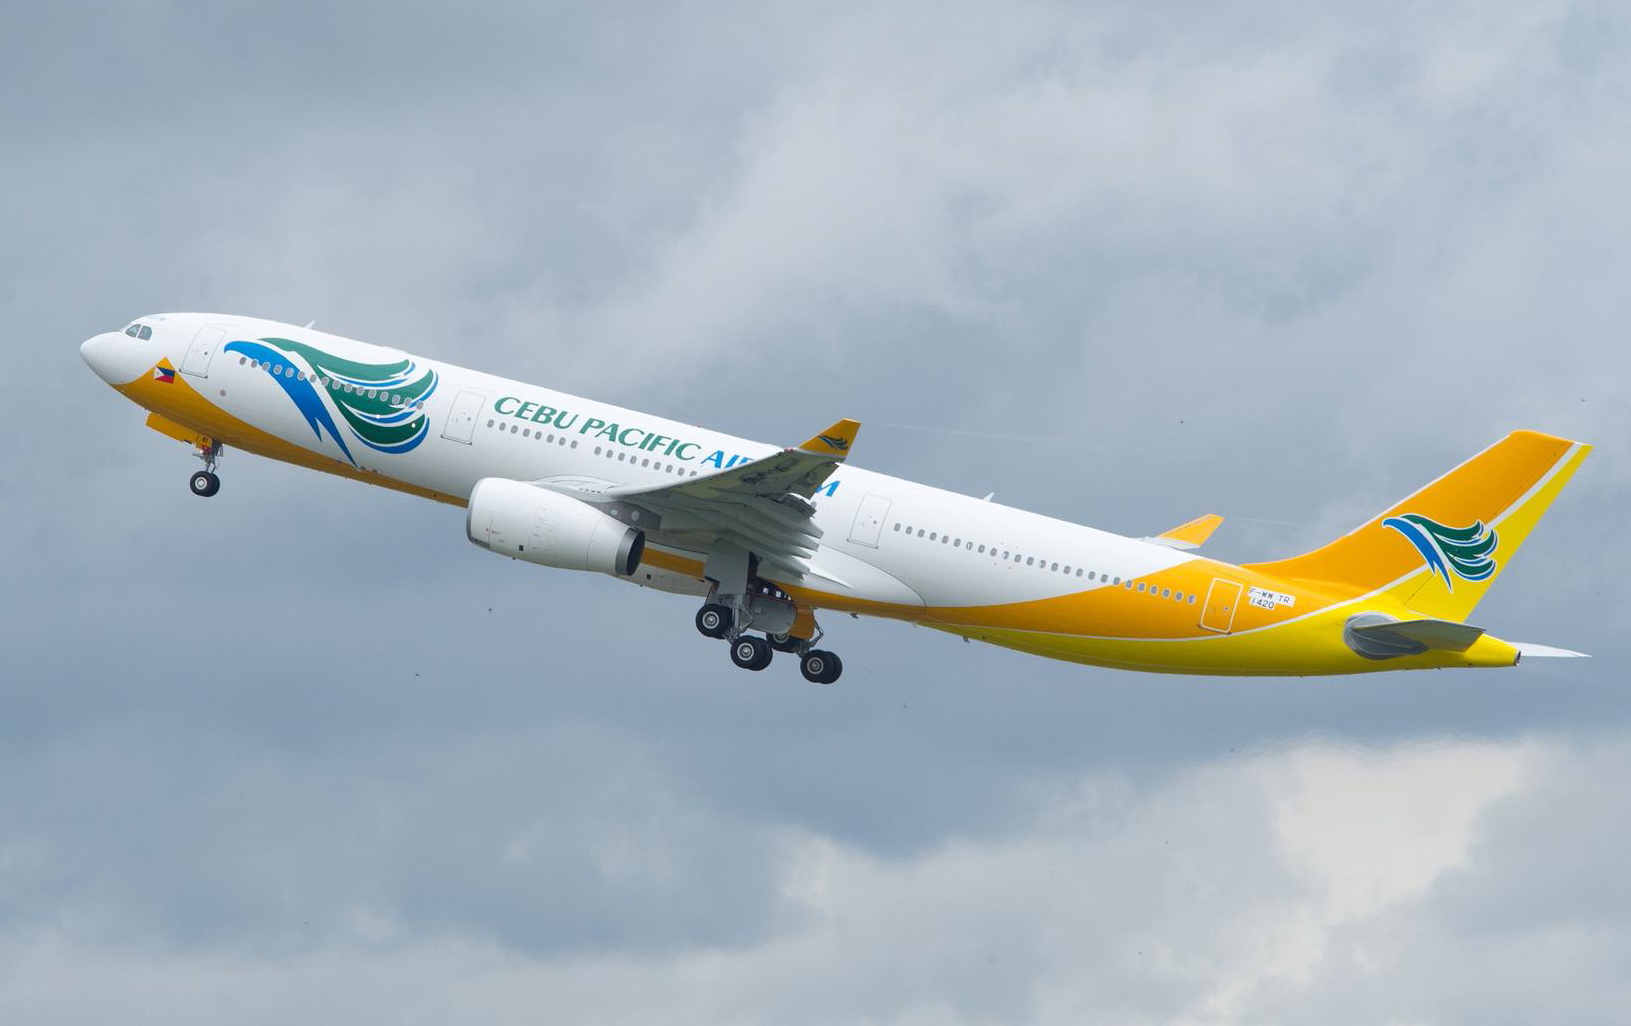 Cebu Pacific A330-300. Click to enlarge.